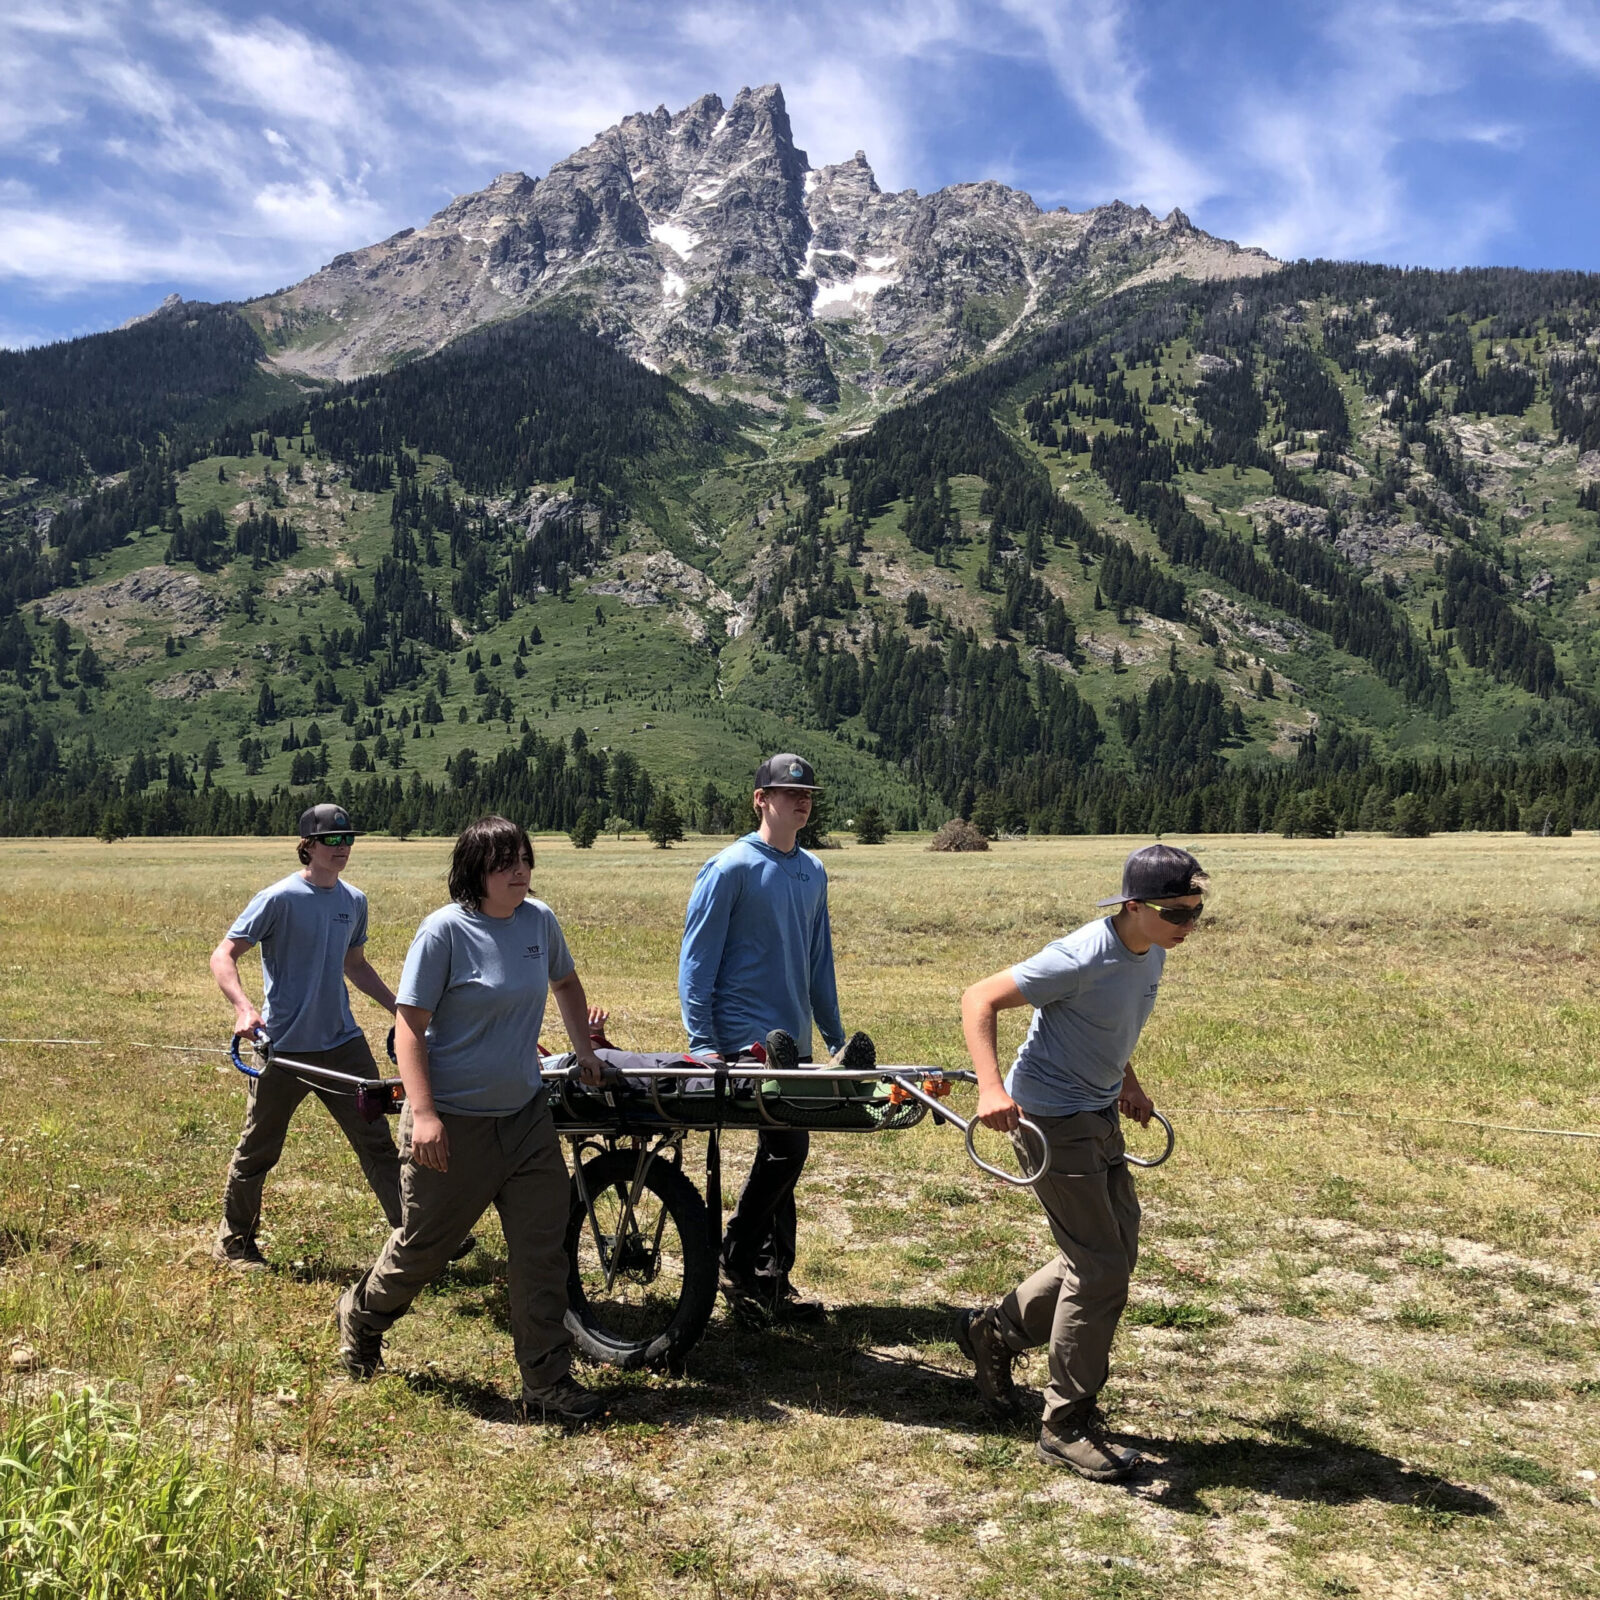 A few crew members try their hand at using a wheeled litter, an essential tool used by the Jenny Lake Rangers for getting injured visitors out of the backcountry.